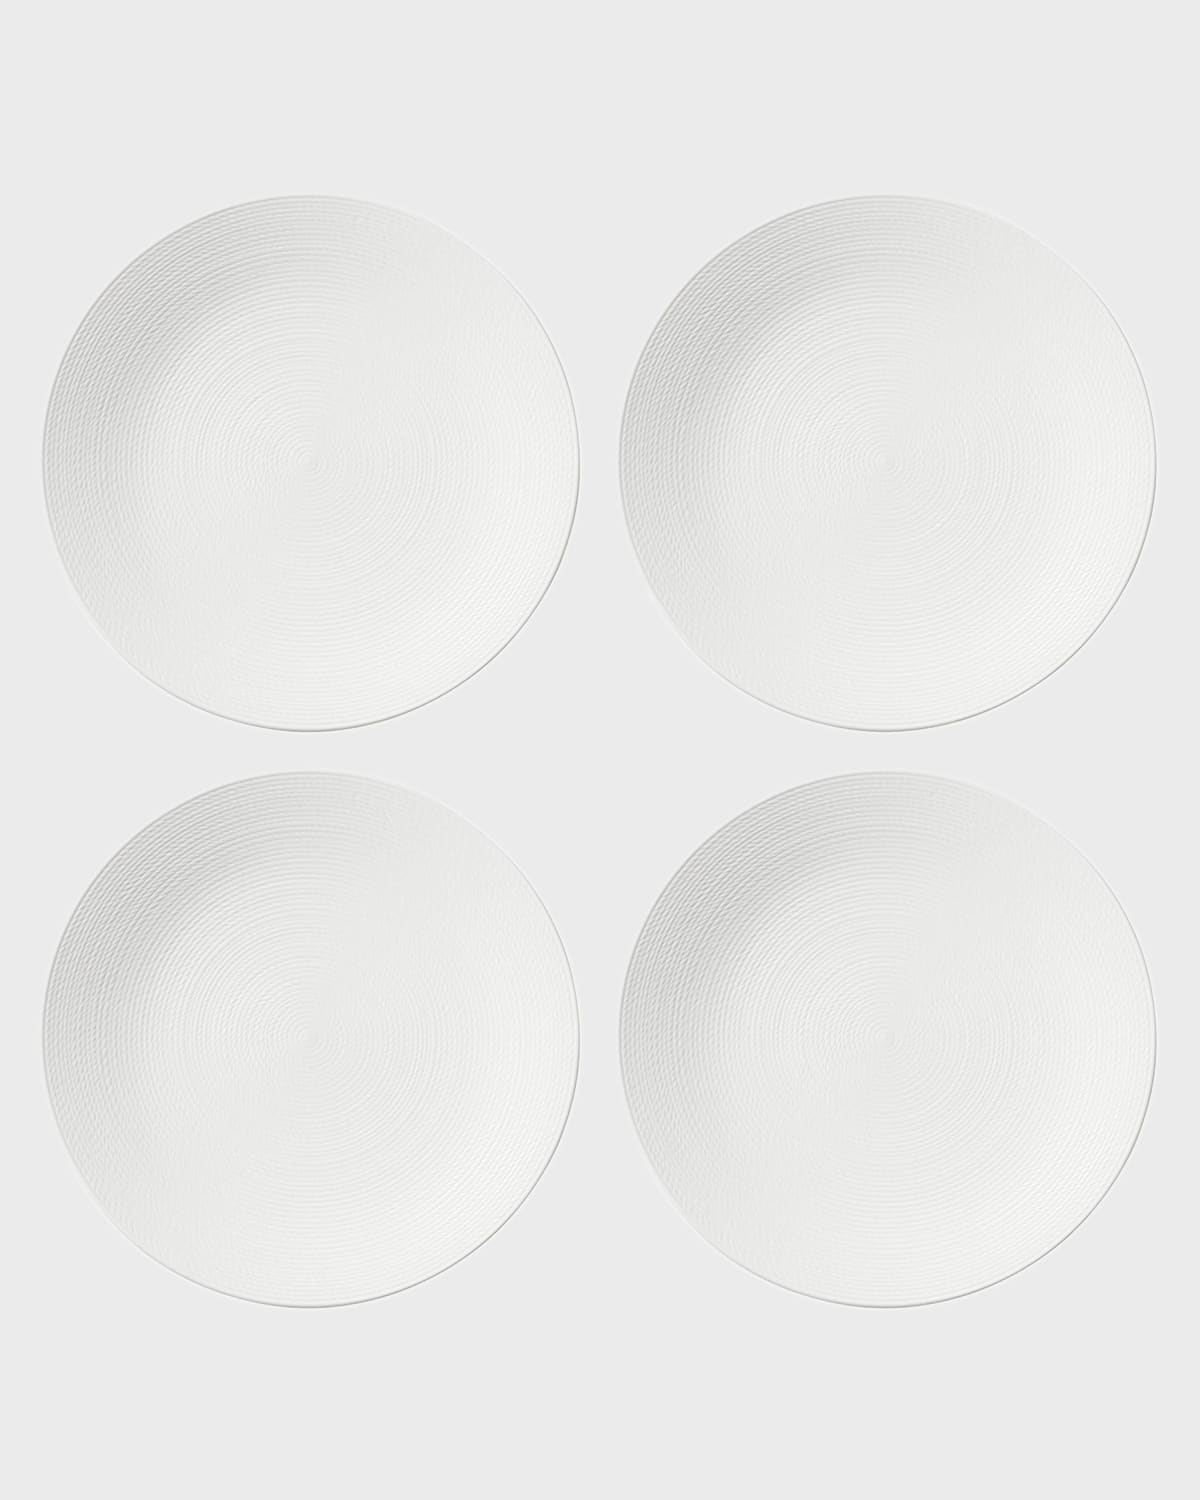 LENOX LX COLLECTIVE WHITE DINNER PLATES, SET OF 4